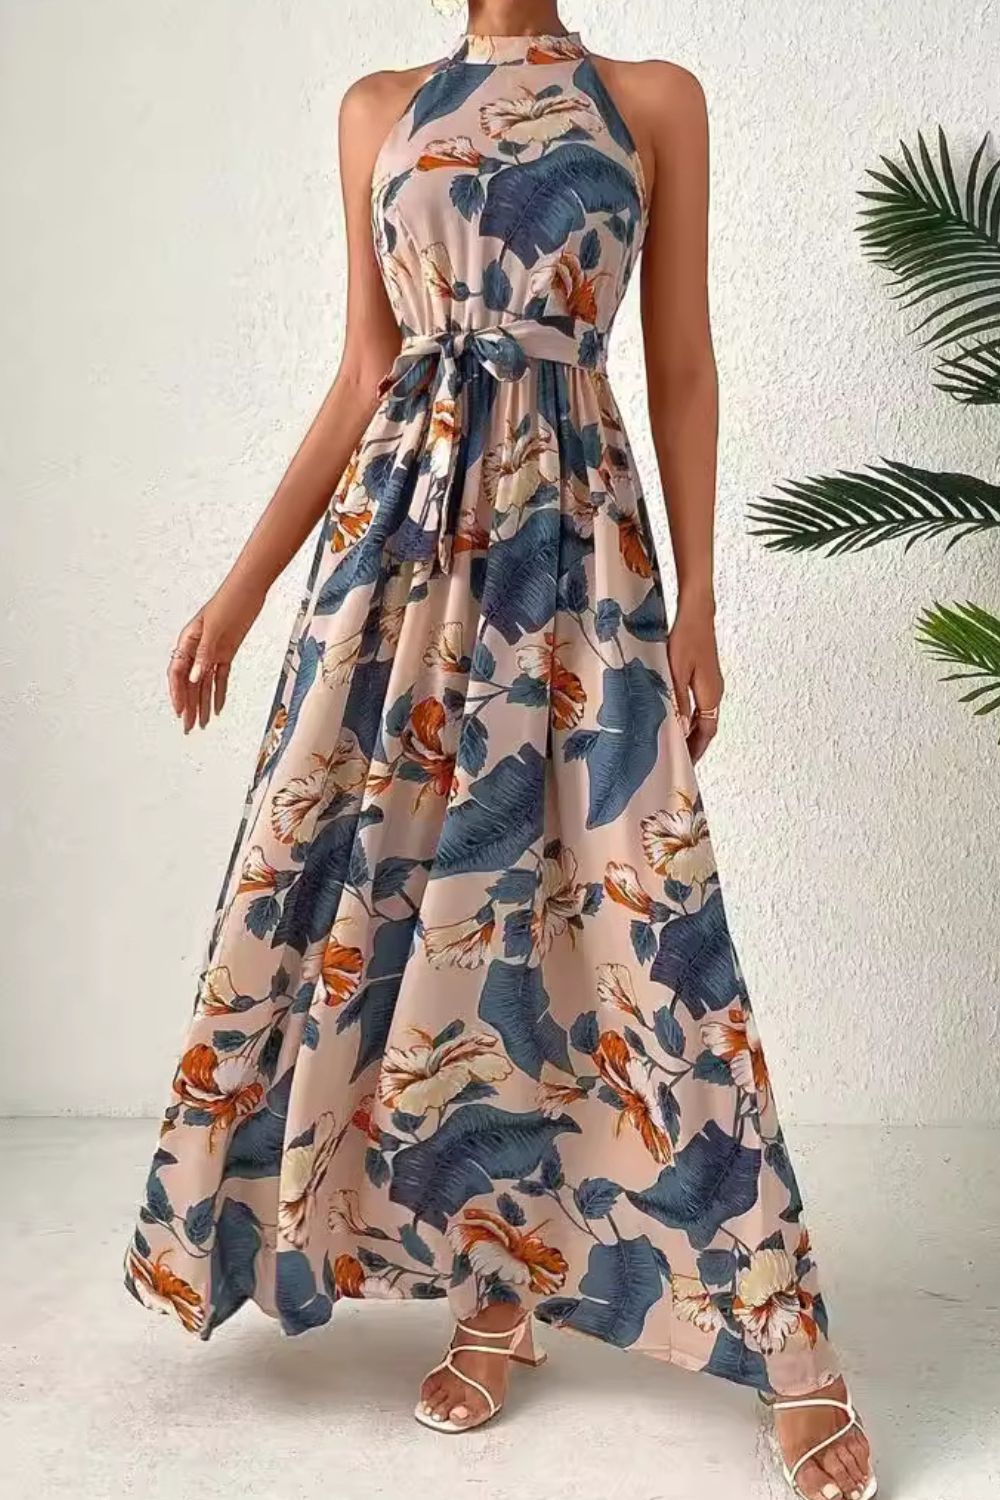 Tied Floral Sleeveless Dress